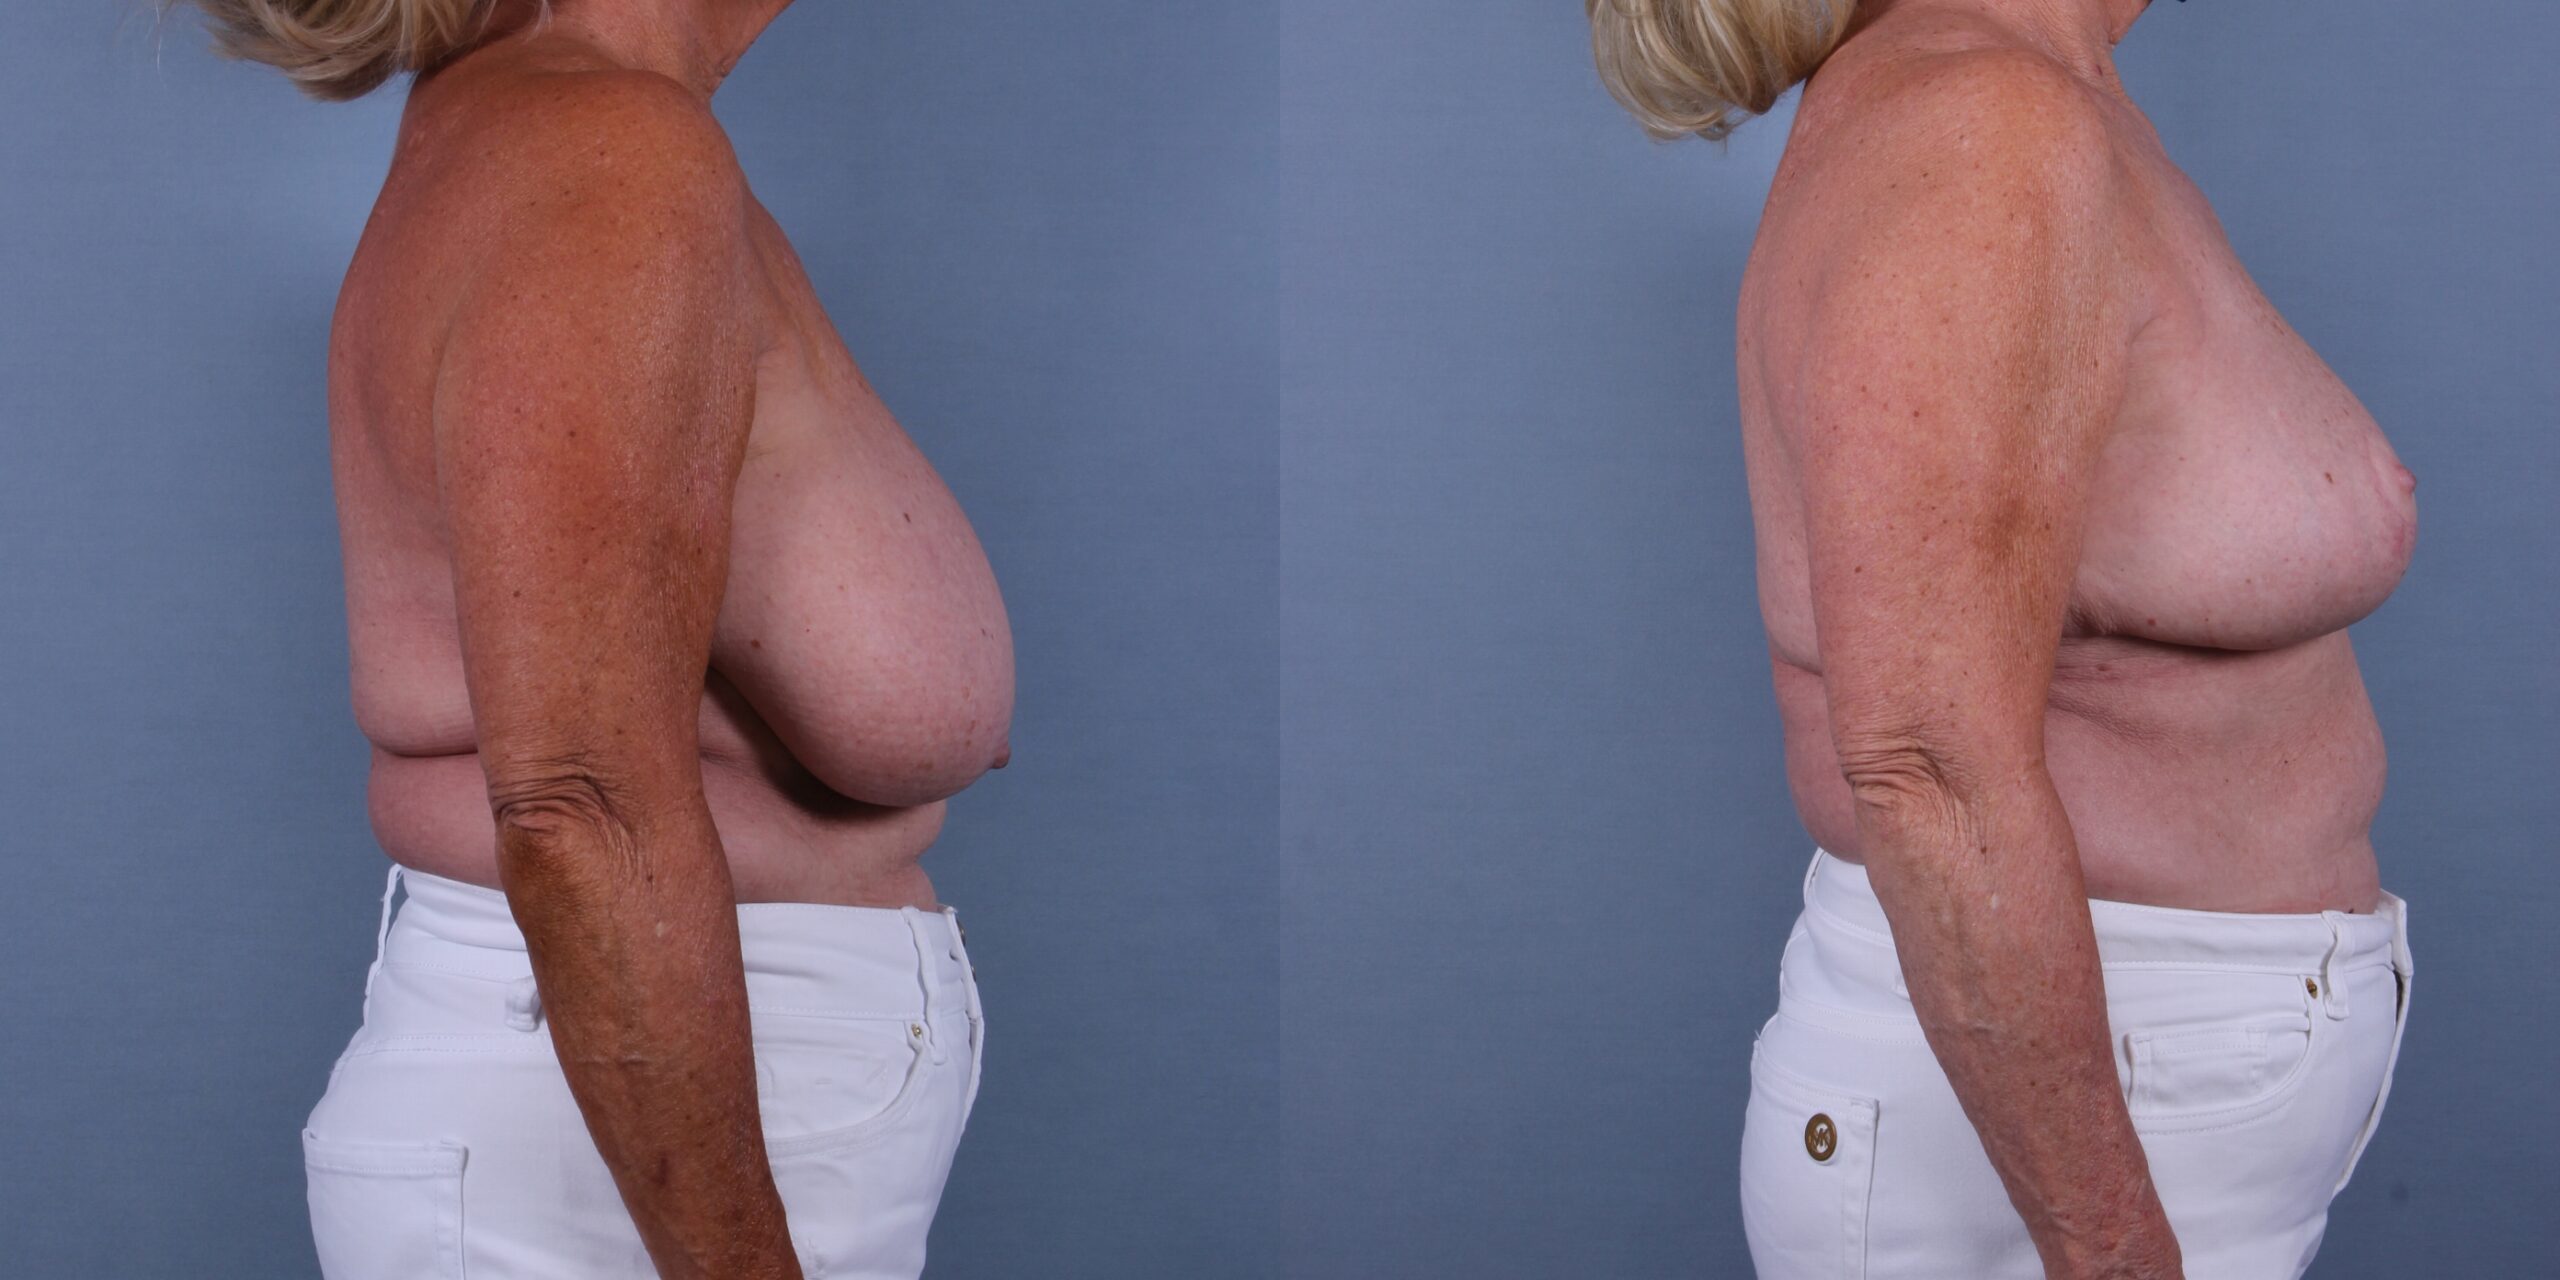 breast reduction surgery near me free consultation